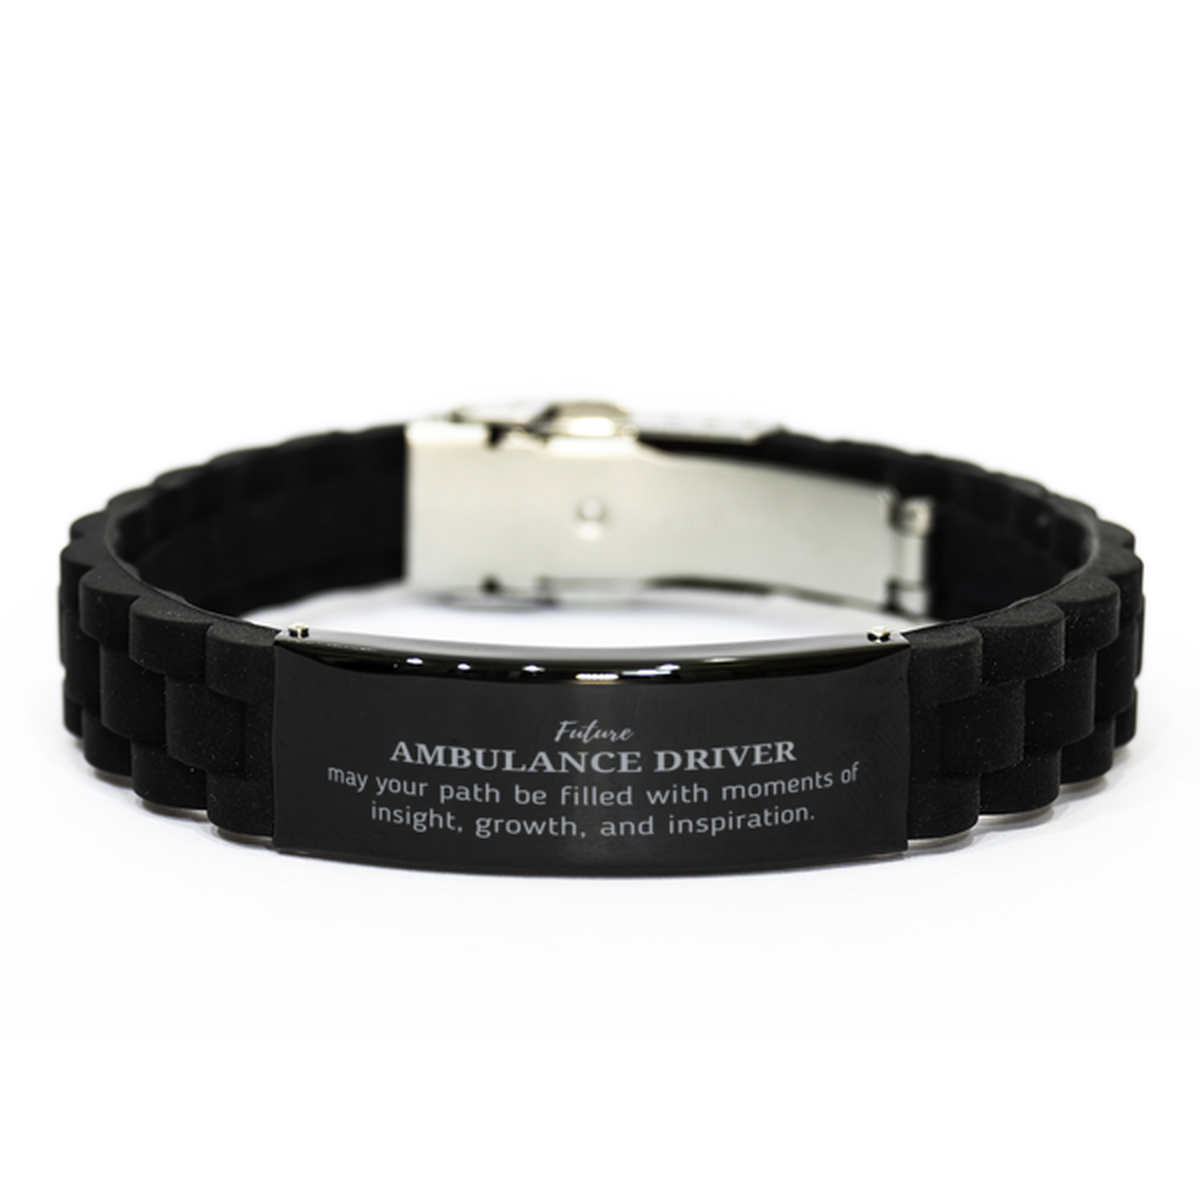 Future Ambulance Driver Gifts, May your path be filled with moments of insight, Graduation Gifts for New Ambulance Driver, Christmas Unique Black Glidelock Clasp Bracelet For Men, Women, Friends